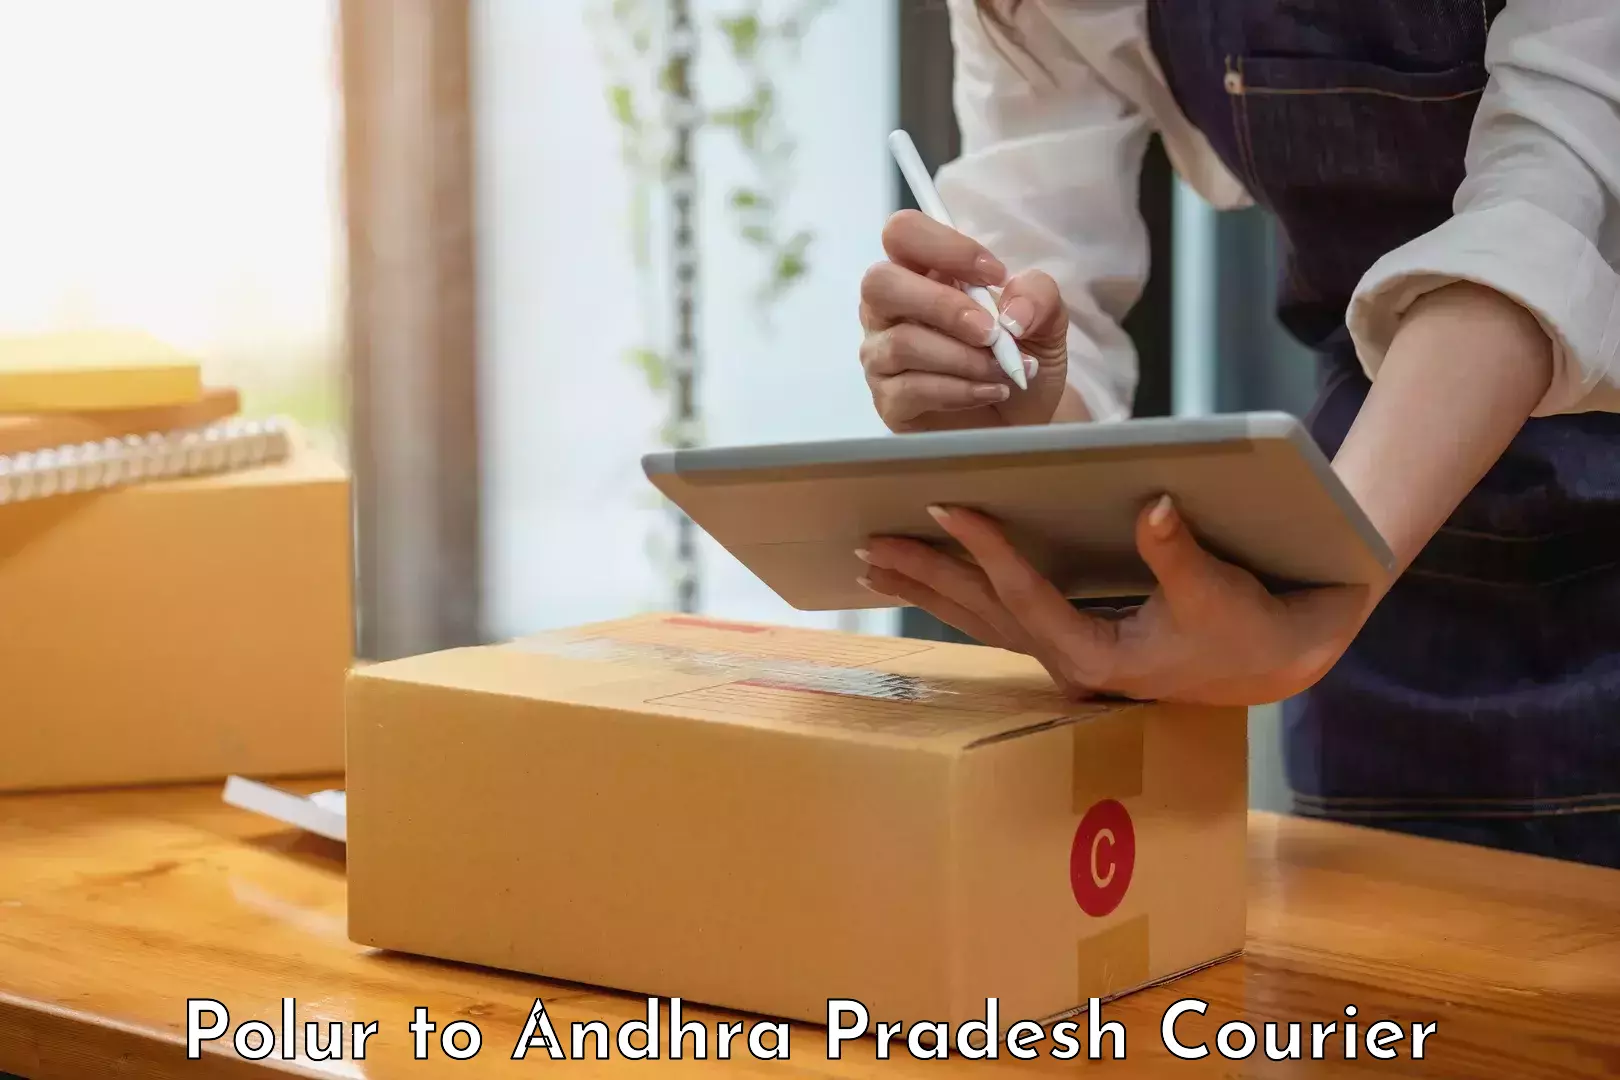 Personal parcel delivery in Polur to East Godavari